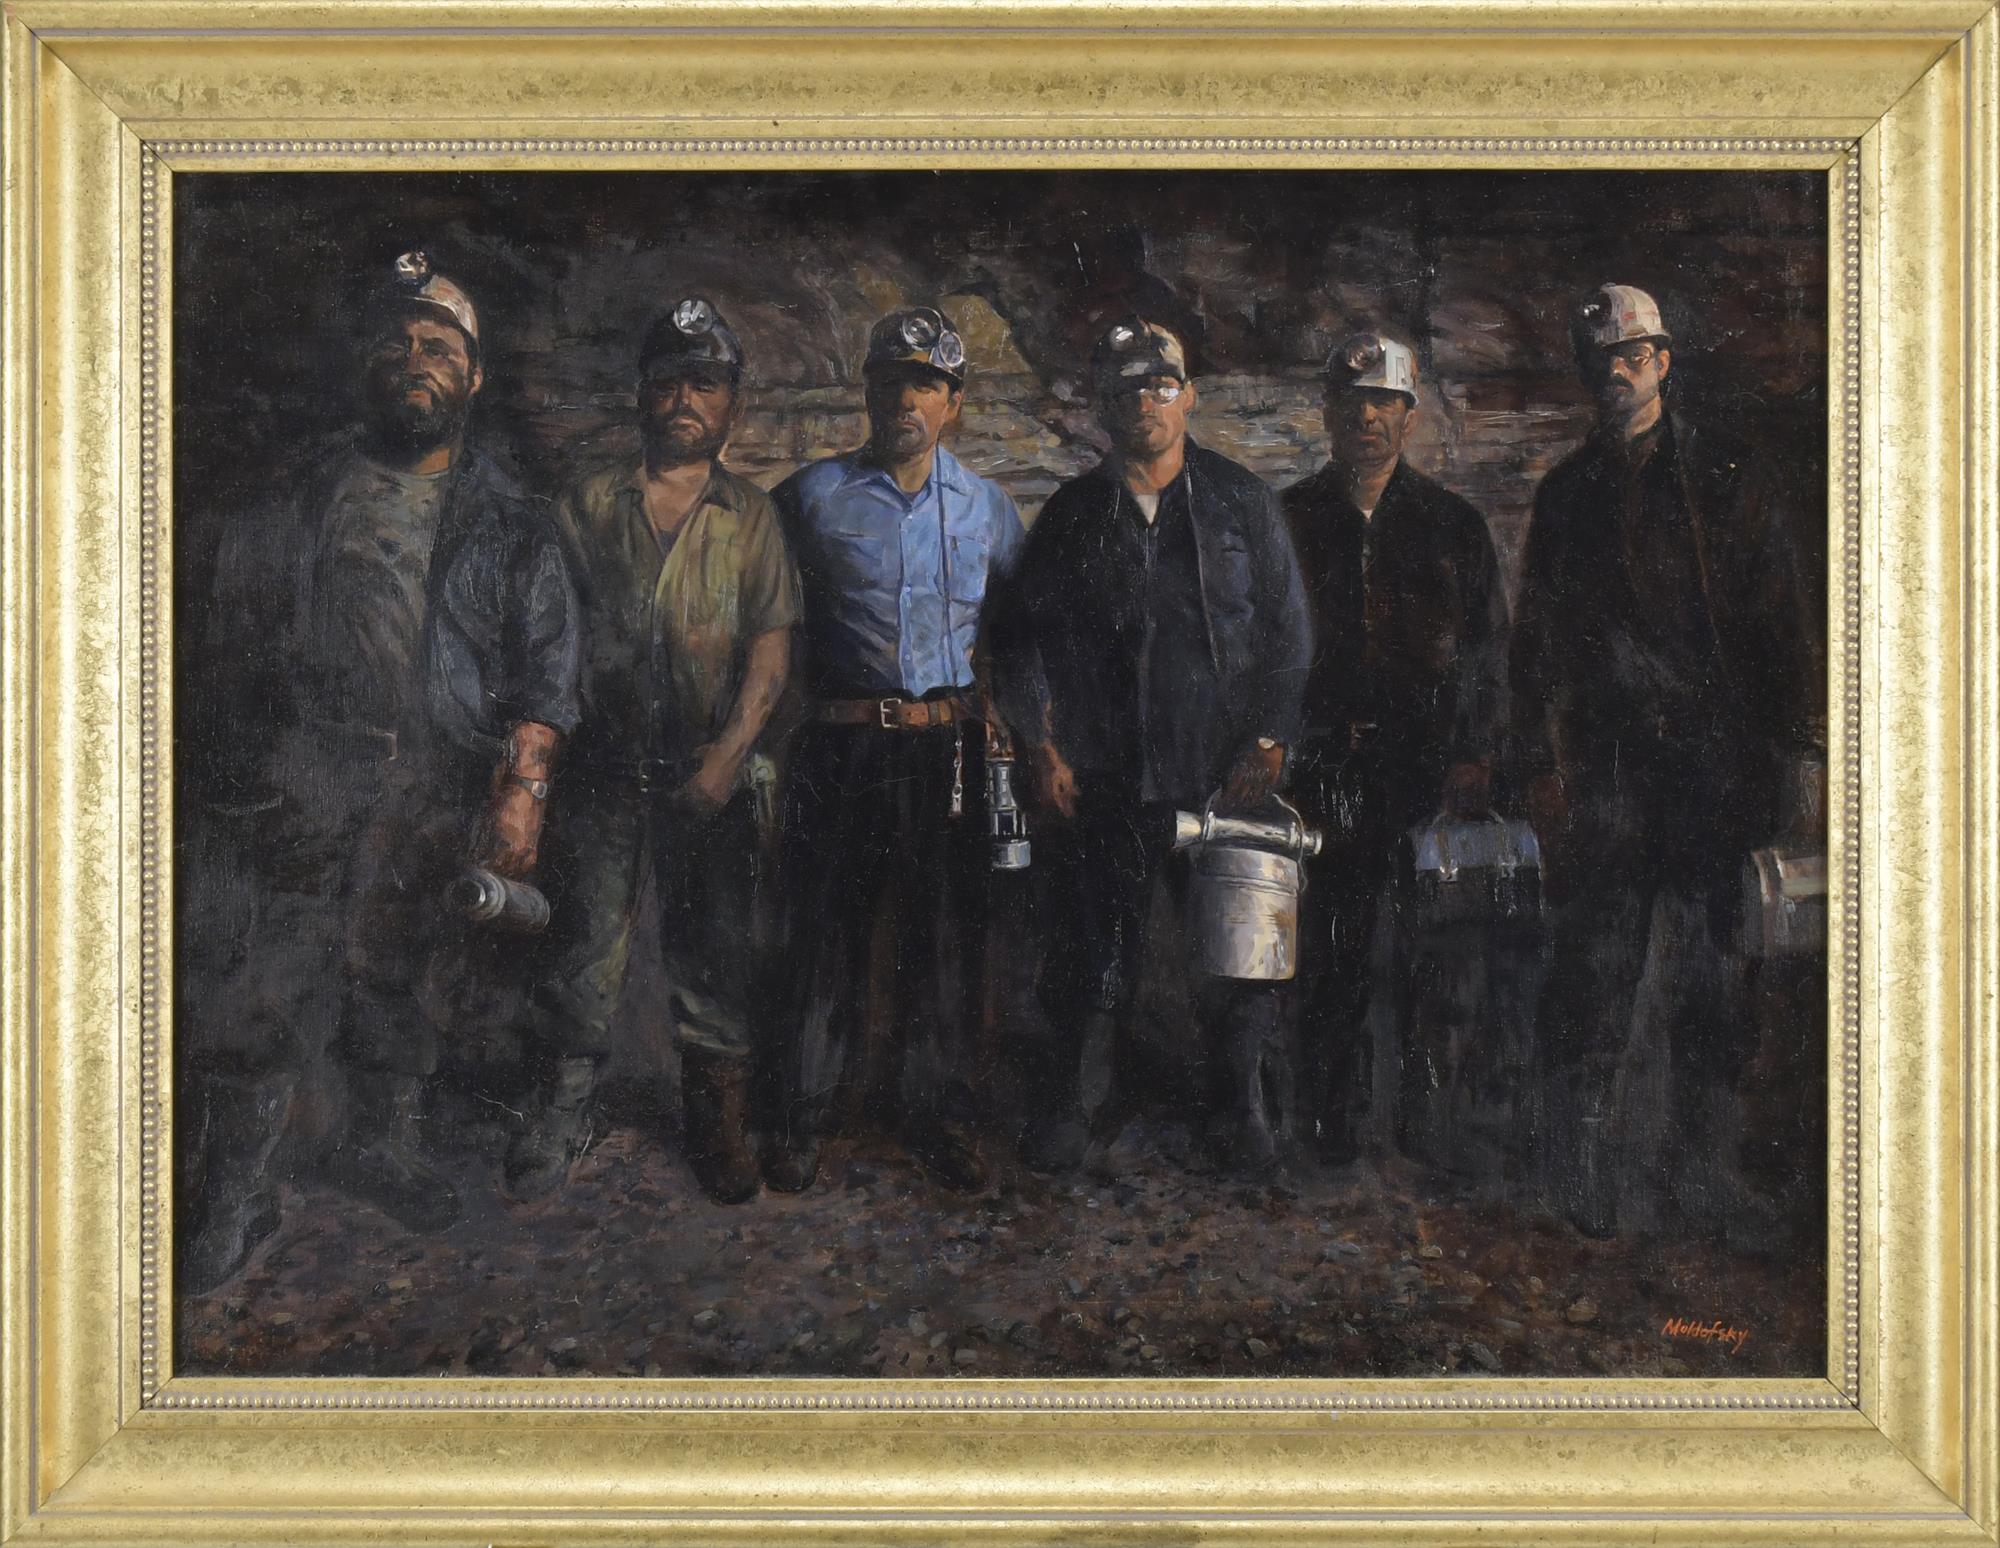 MULDOFSKY OIL, PORTRAIT OF MINERS. 20th